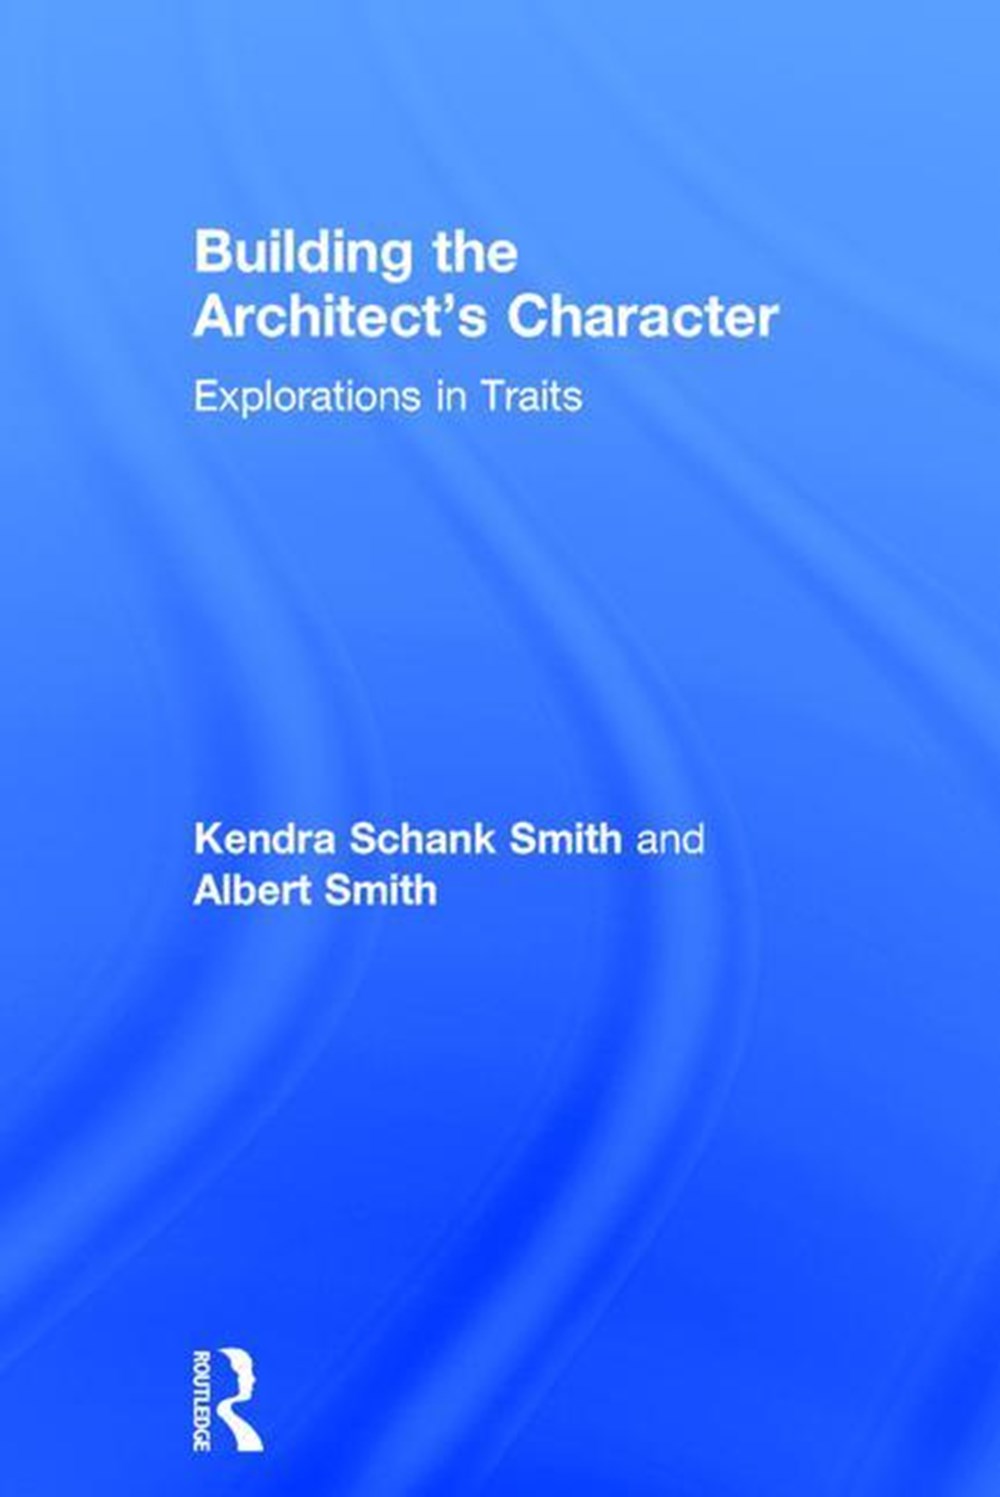 Building the Architect's Character: Explorations in Traits